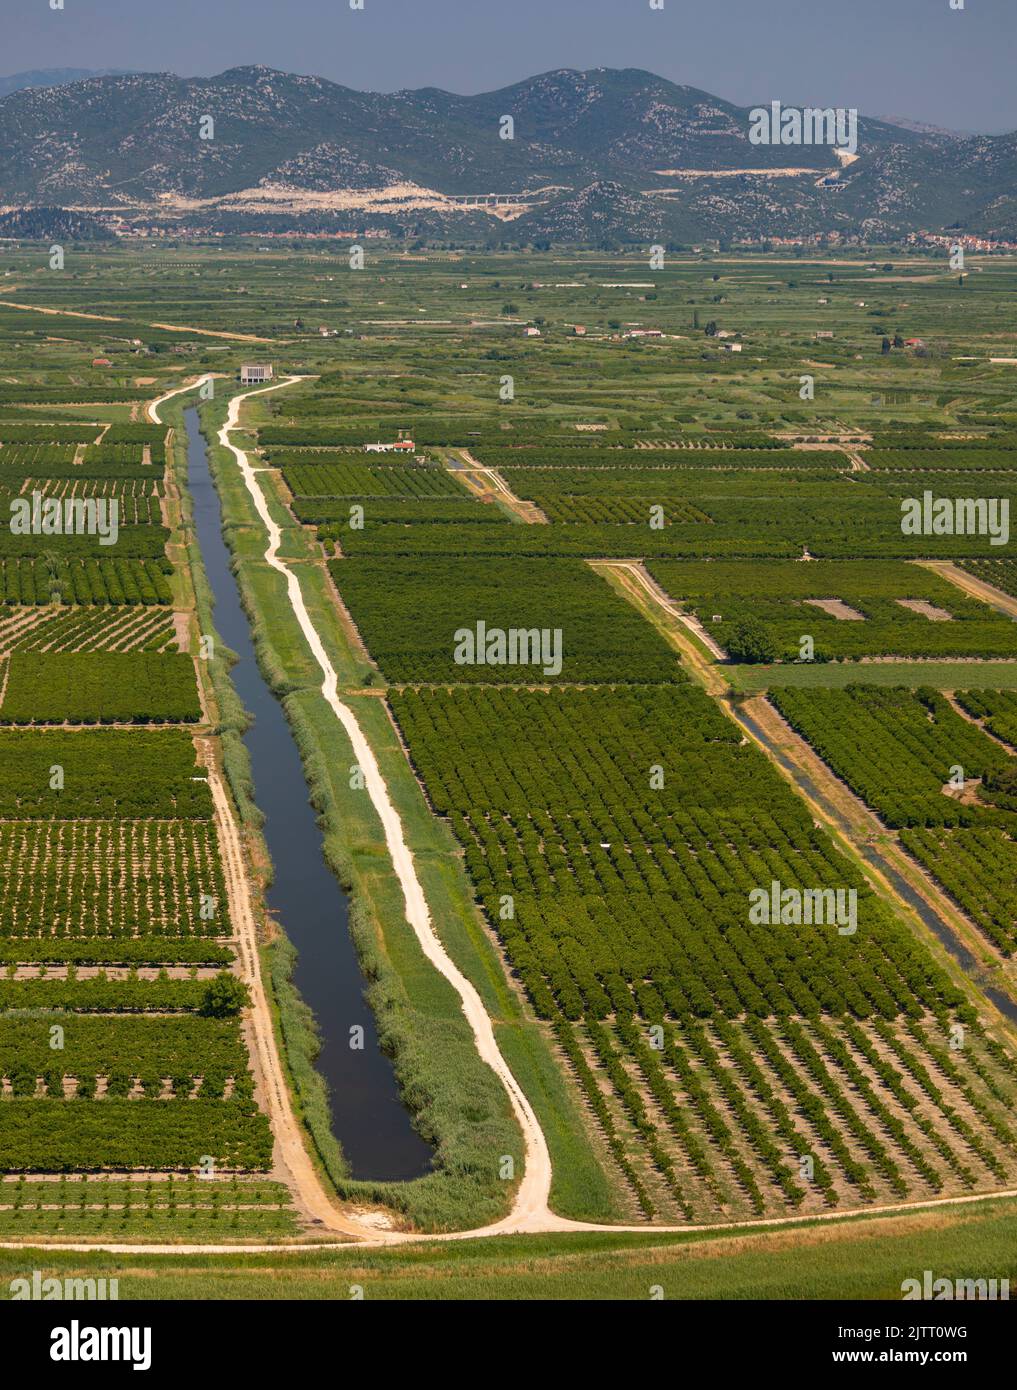 OPUZEN, NERETVA VALLEY, CROATIA, EUROPE - Agriculture and irrigation canals in the Neretva River Valley. Stock Photo